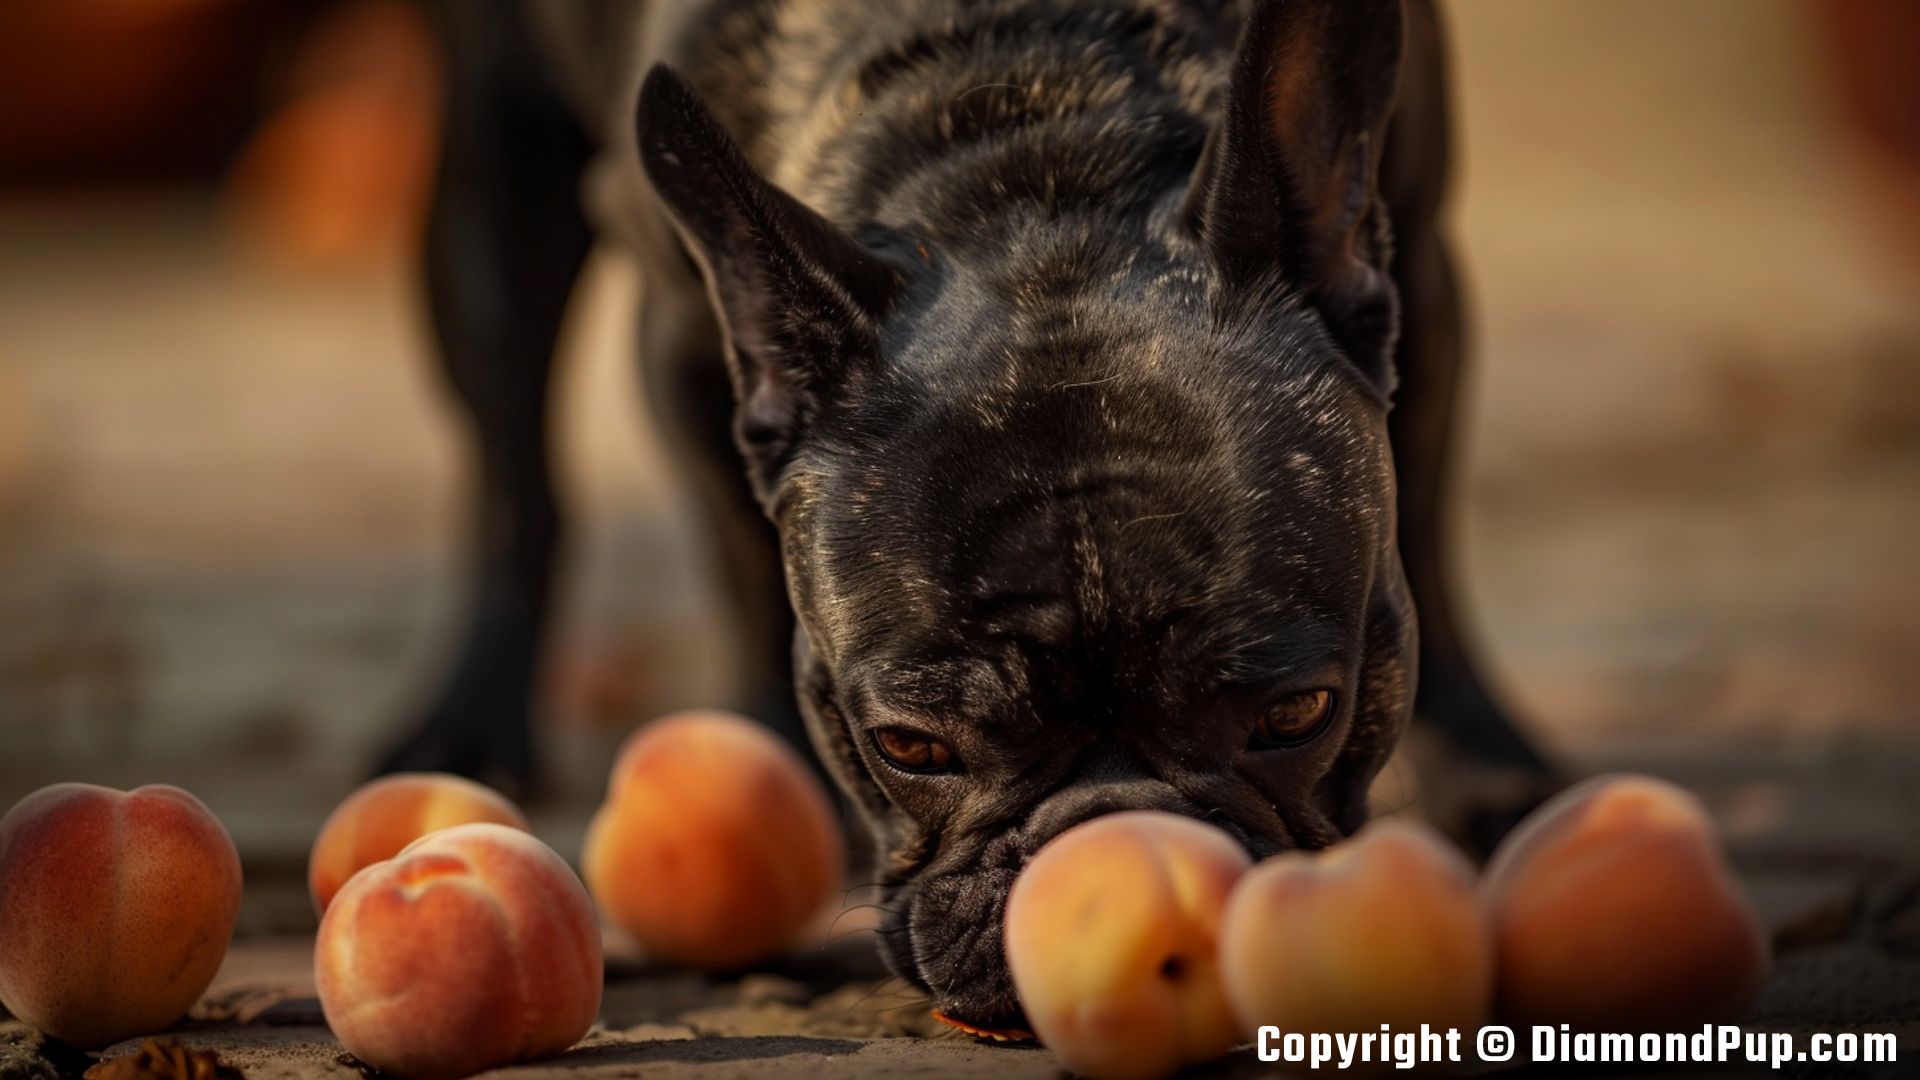 Photograph of an Adorable French Bulldog Snacking on Peaches